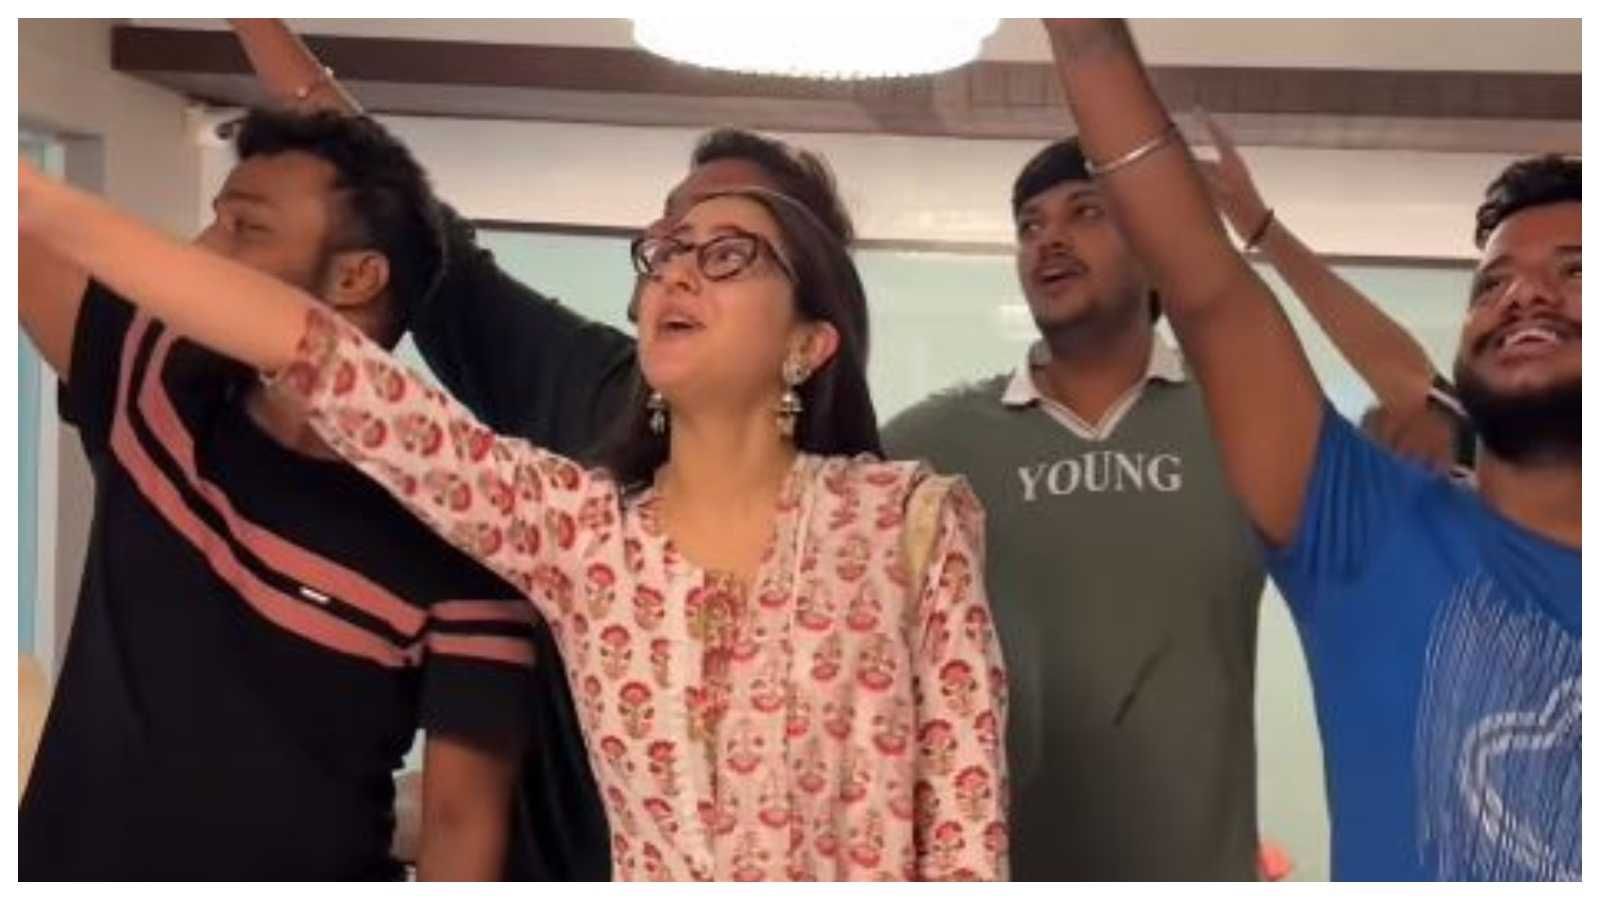 'Only nepo kid with good social skills': Sara Ali Khan does Tere Vaaste hook step with paparazzi; netizens shower praise